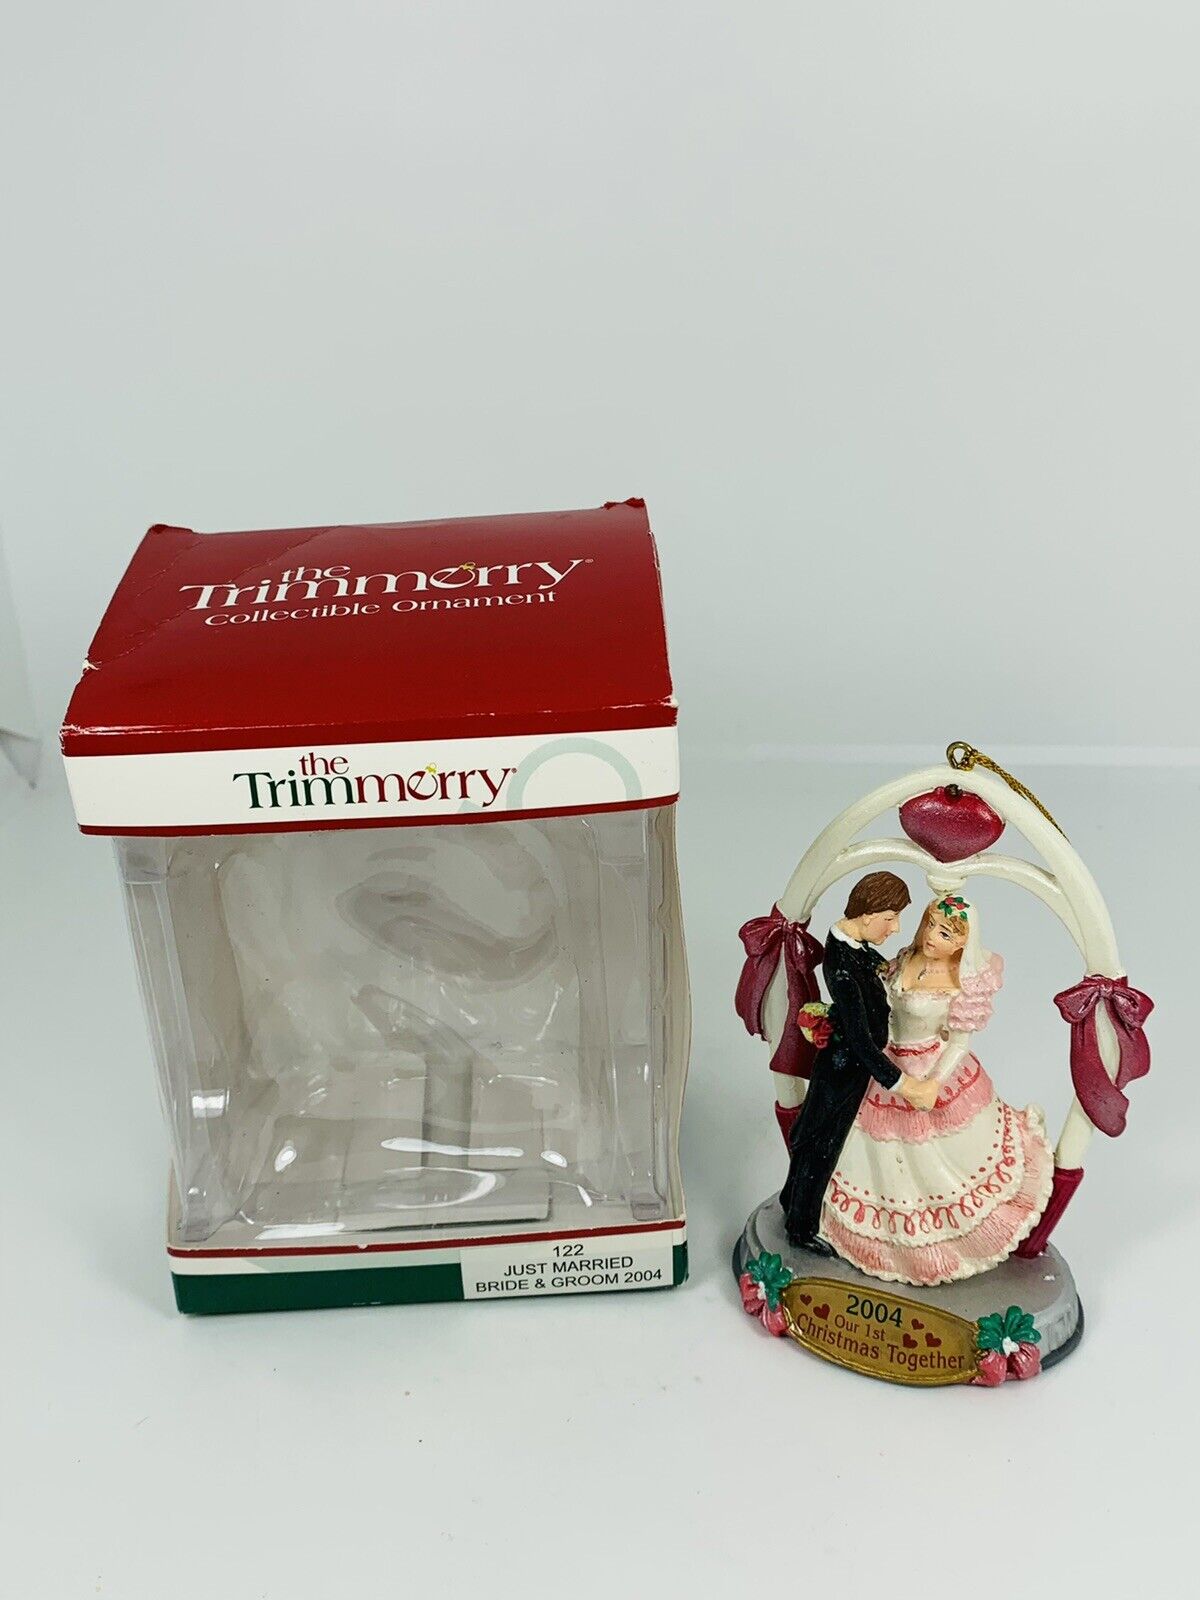 The Trimmerry Bride And Groom 2004 Christmas Ornament Shopko First Christmas